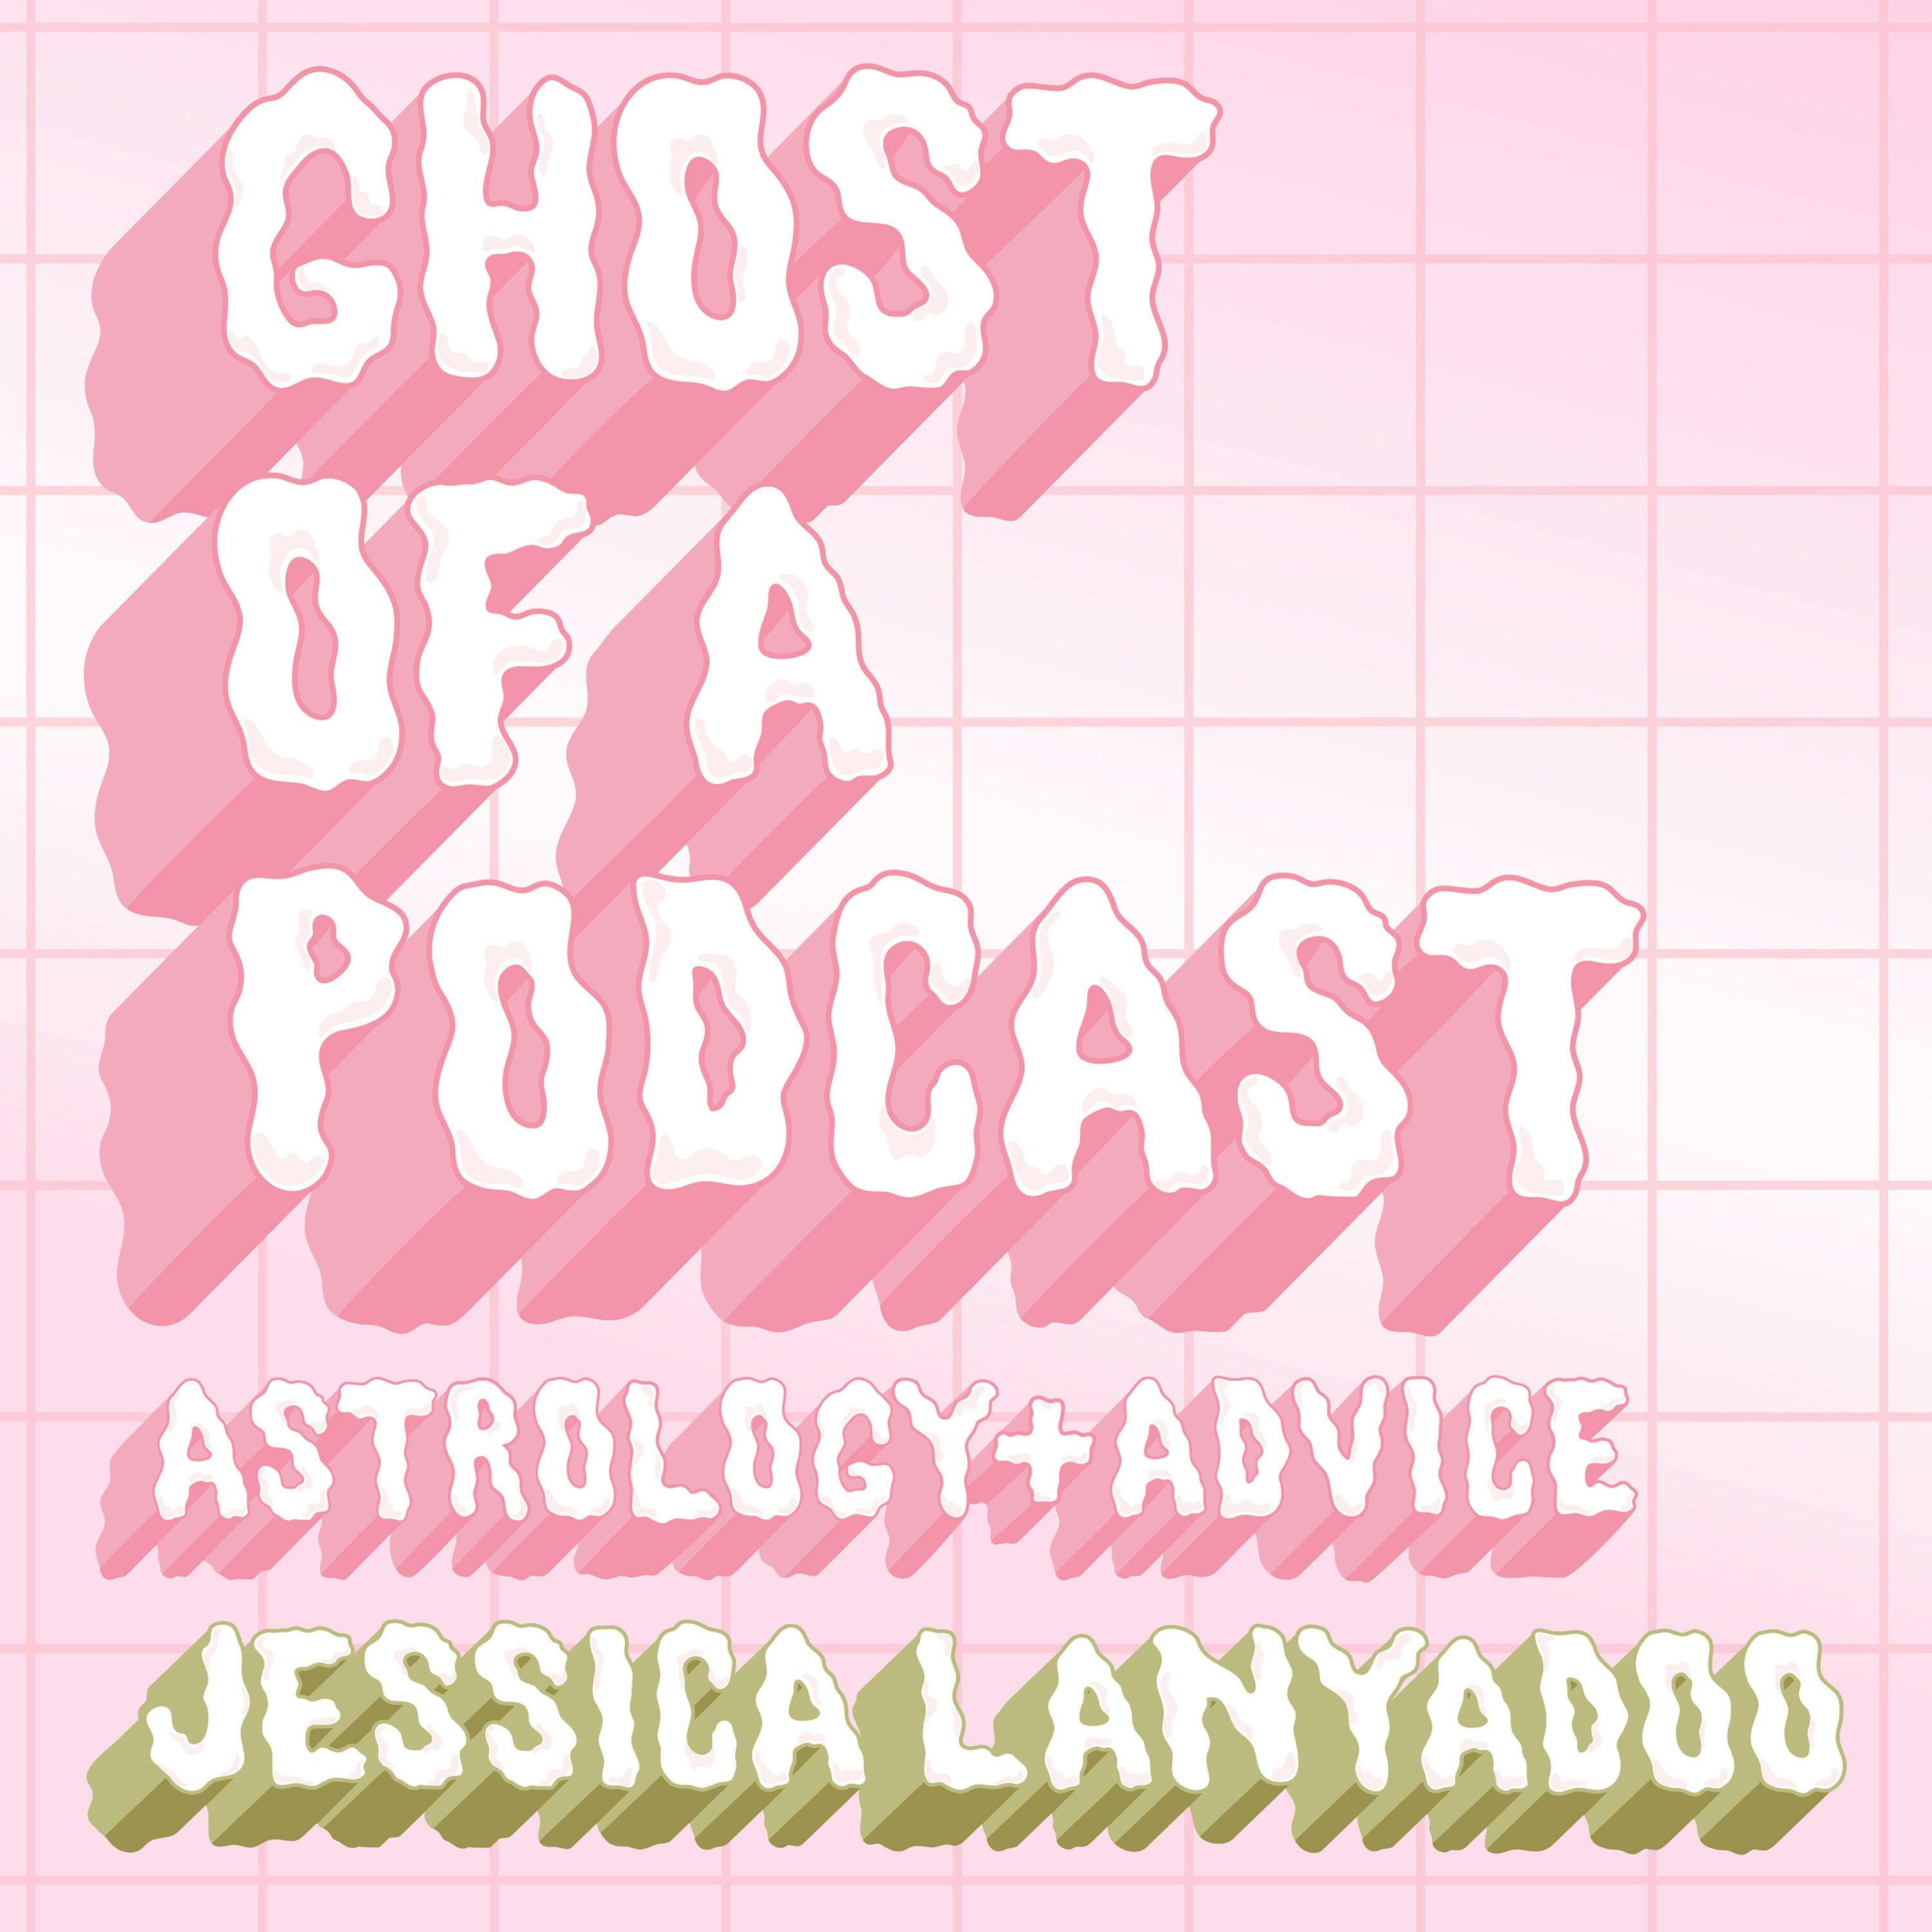 275: How The Sausage Is Made + Horoscope